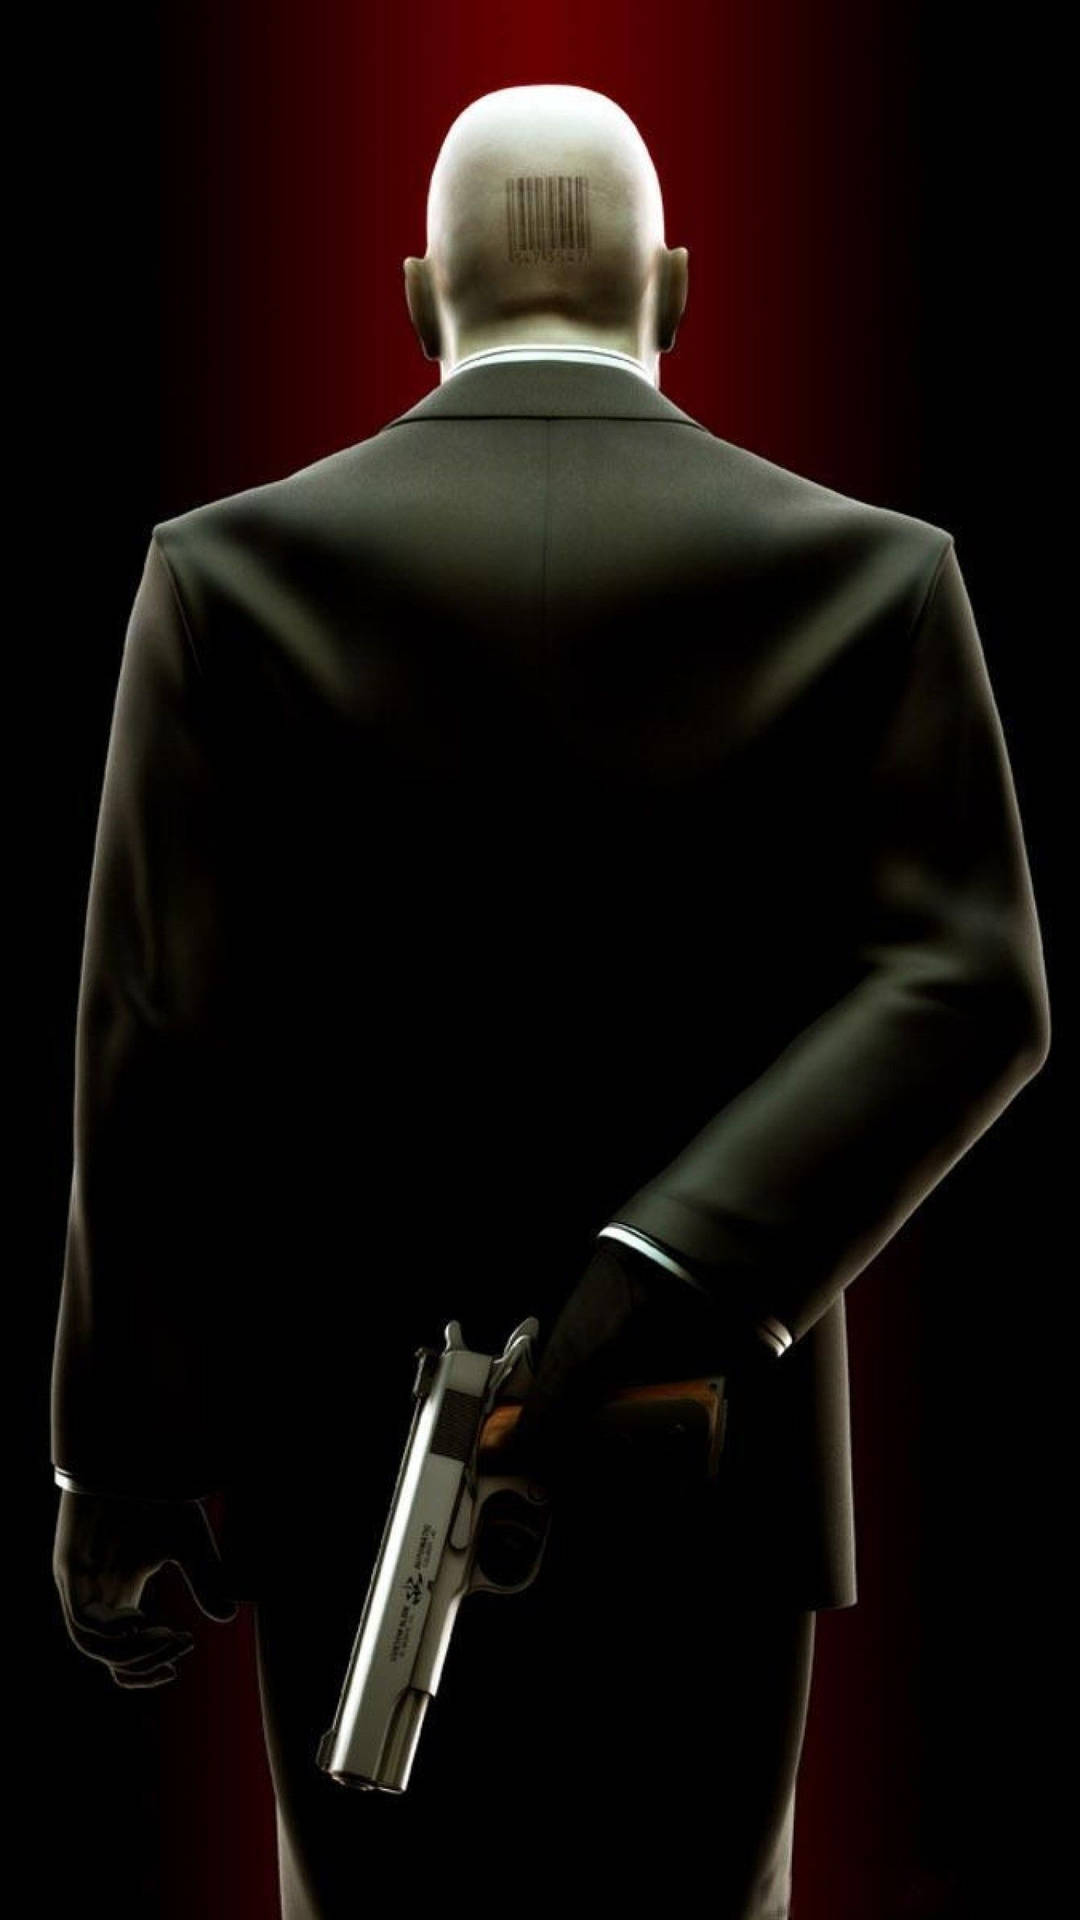 Upgrade Your Mobile Experience with the Hitman Phone Wallpaper